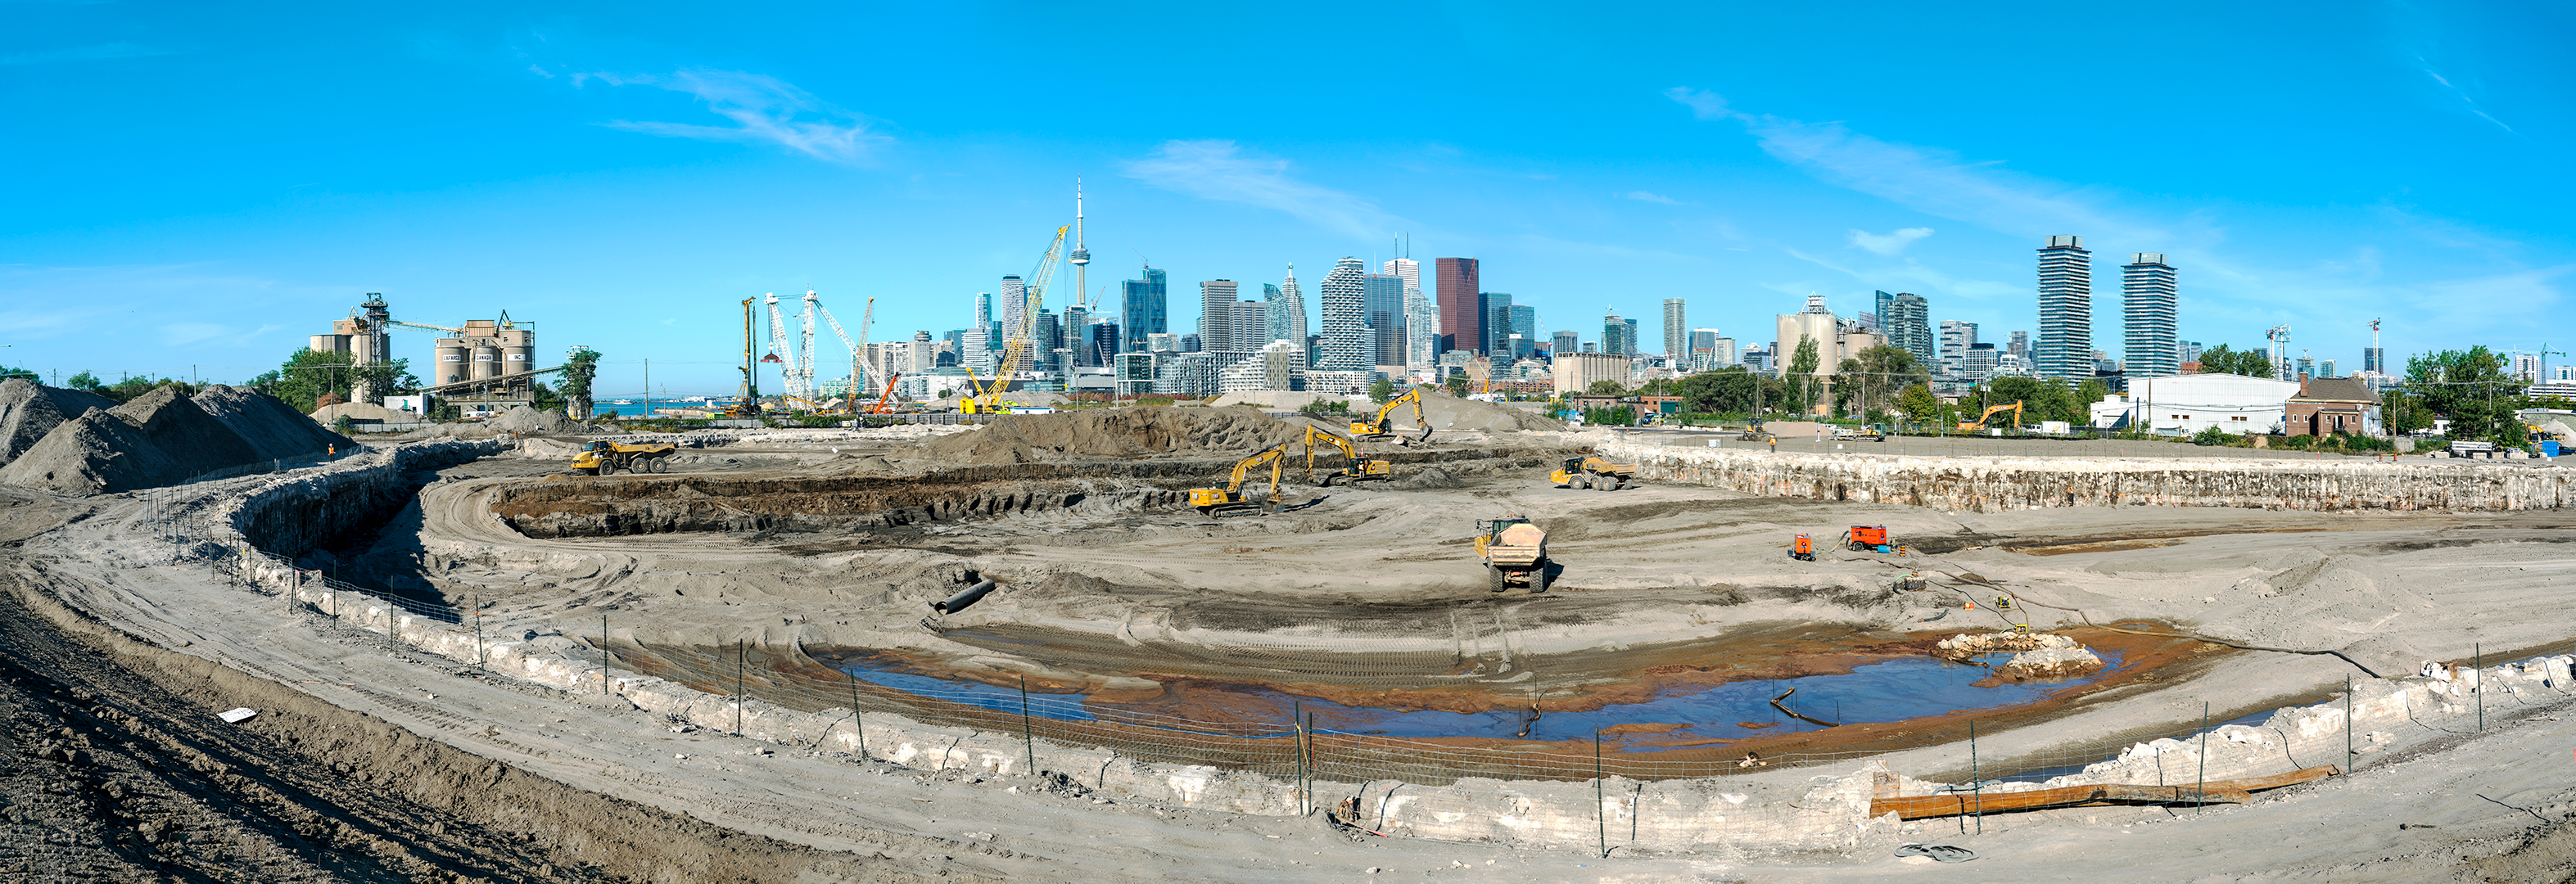 Panorama of new river valley, September 2020